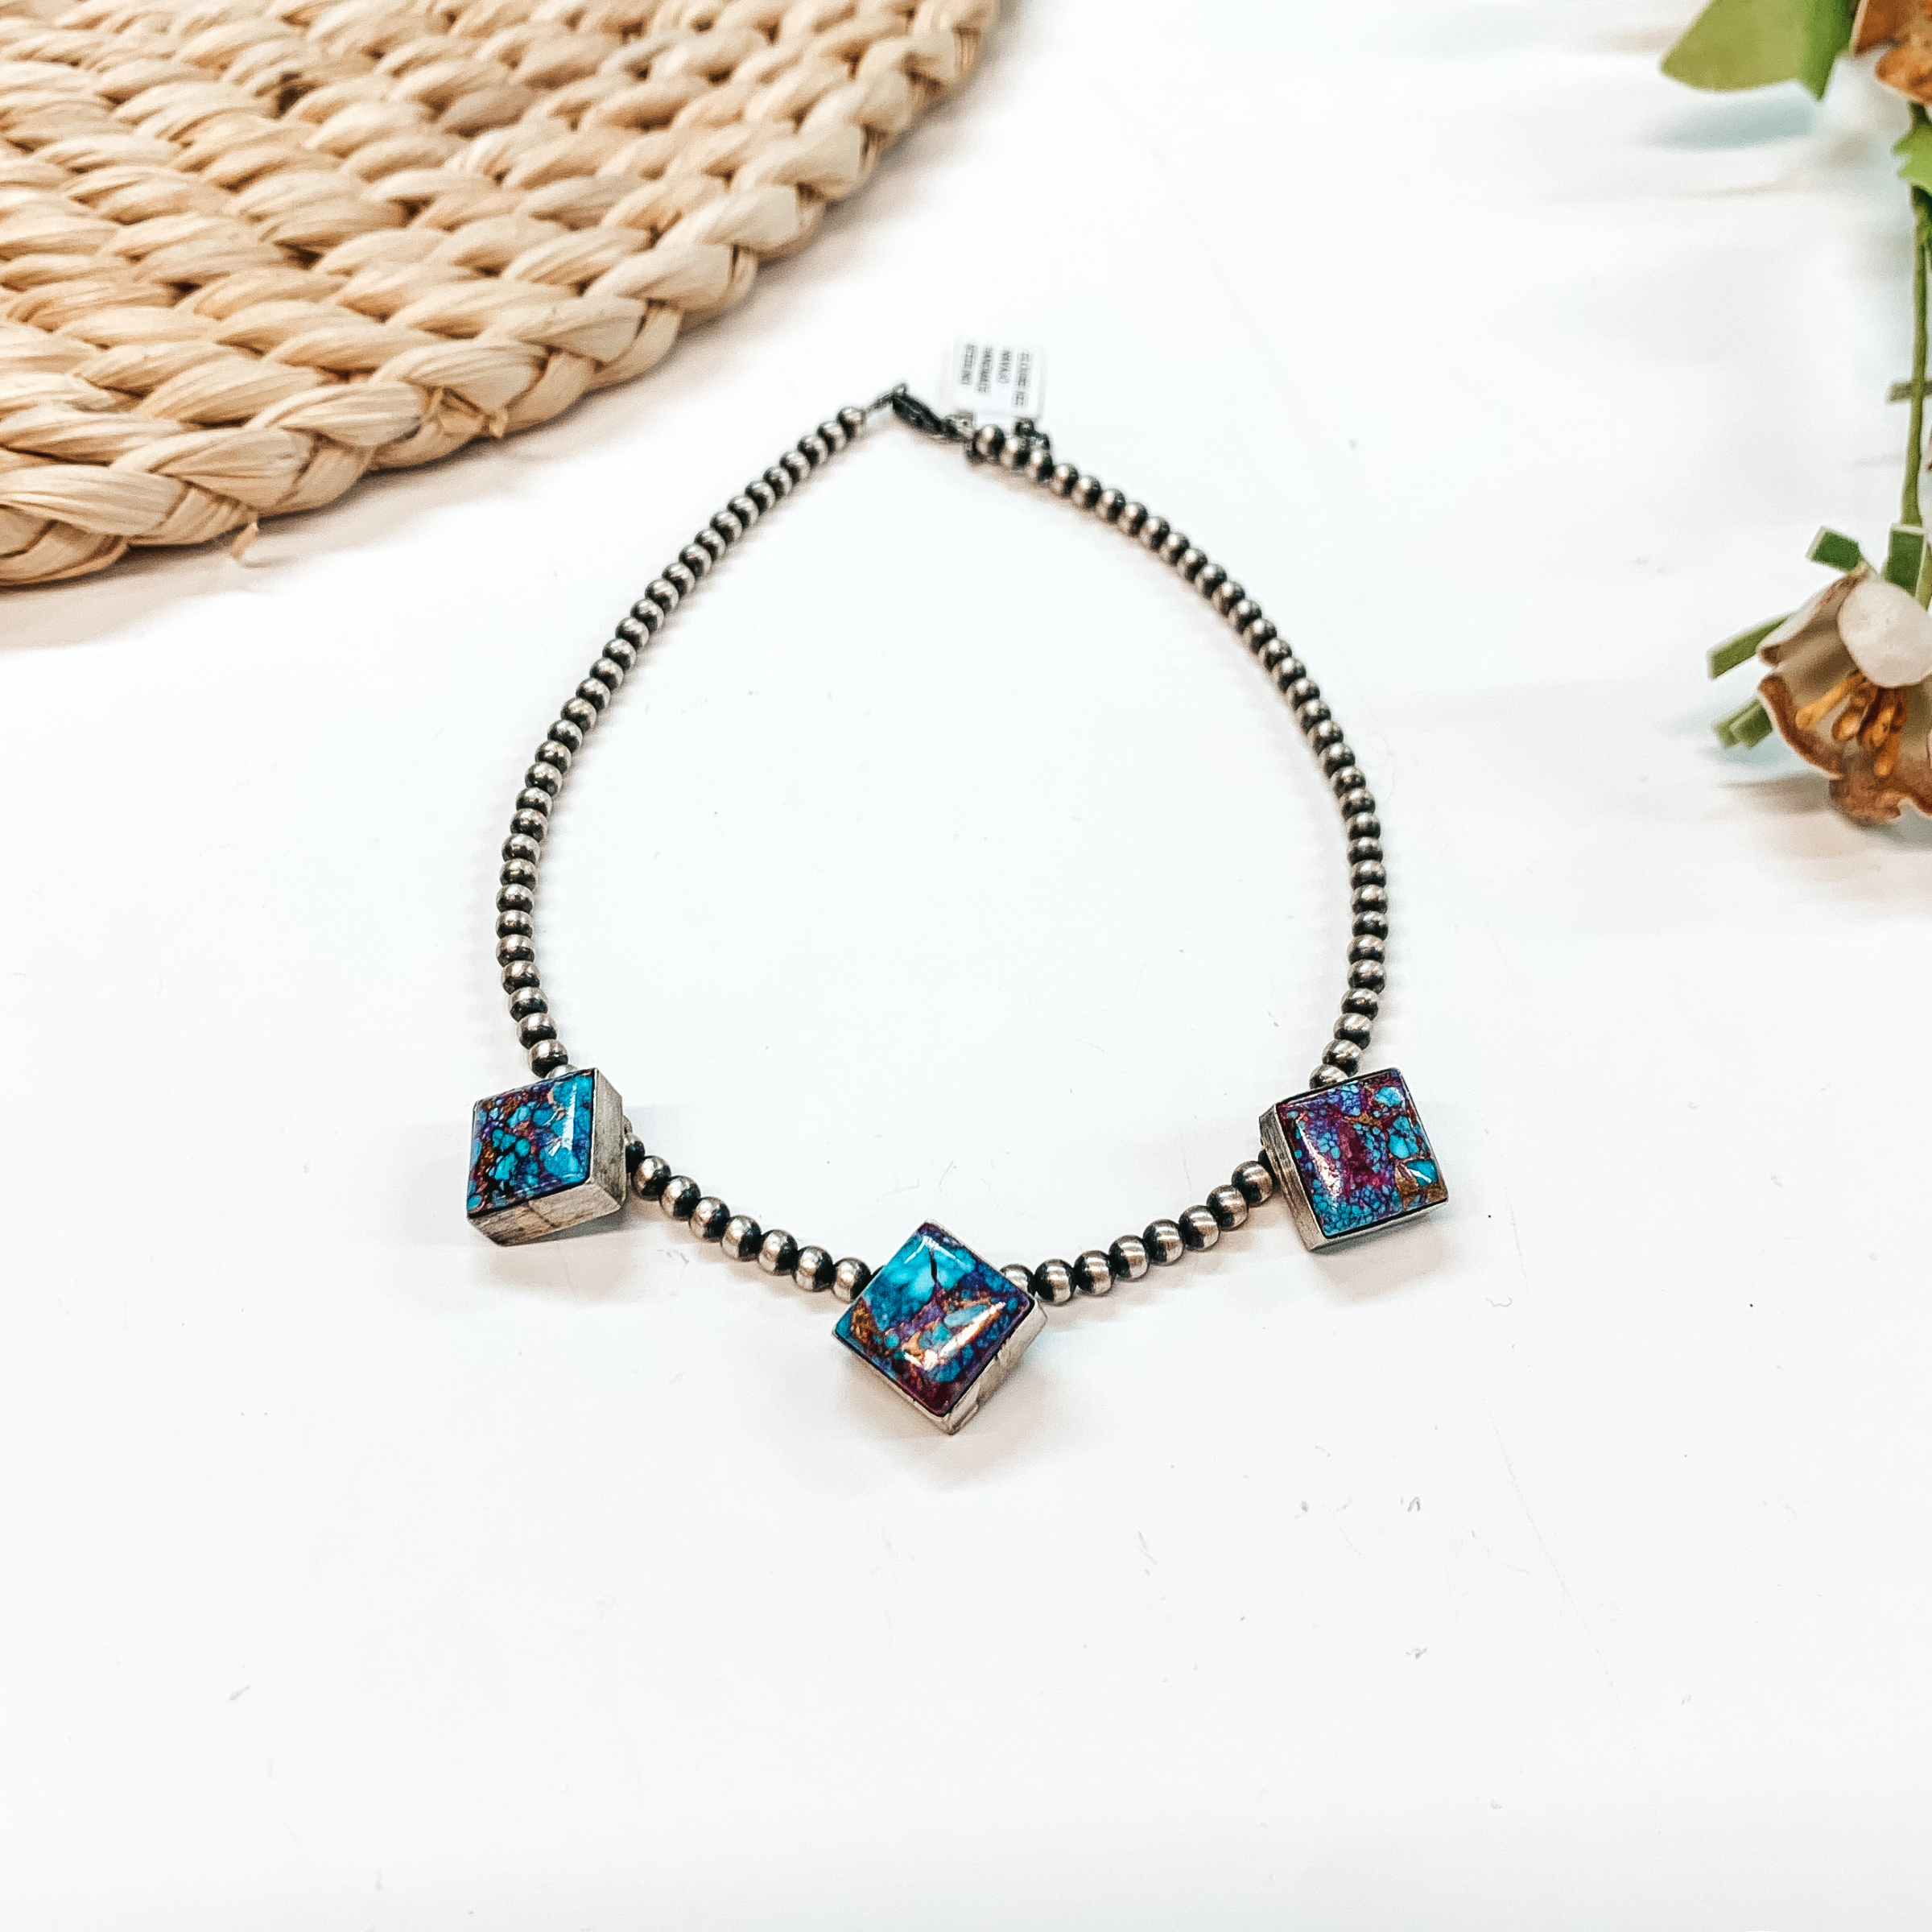 Elouise Kee | Navajo Handmade 4mm 14 inch Navajo Pearl Necklace with 3 Diamond Remix Mojave Turquoise Stones - Giddy Up Glamour Boutique